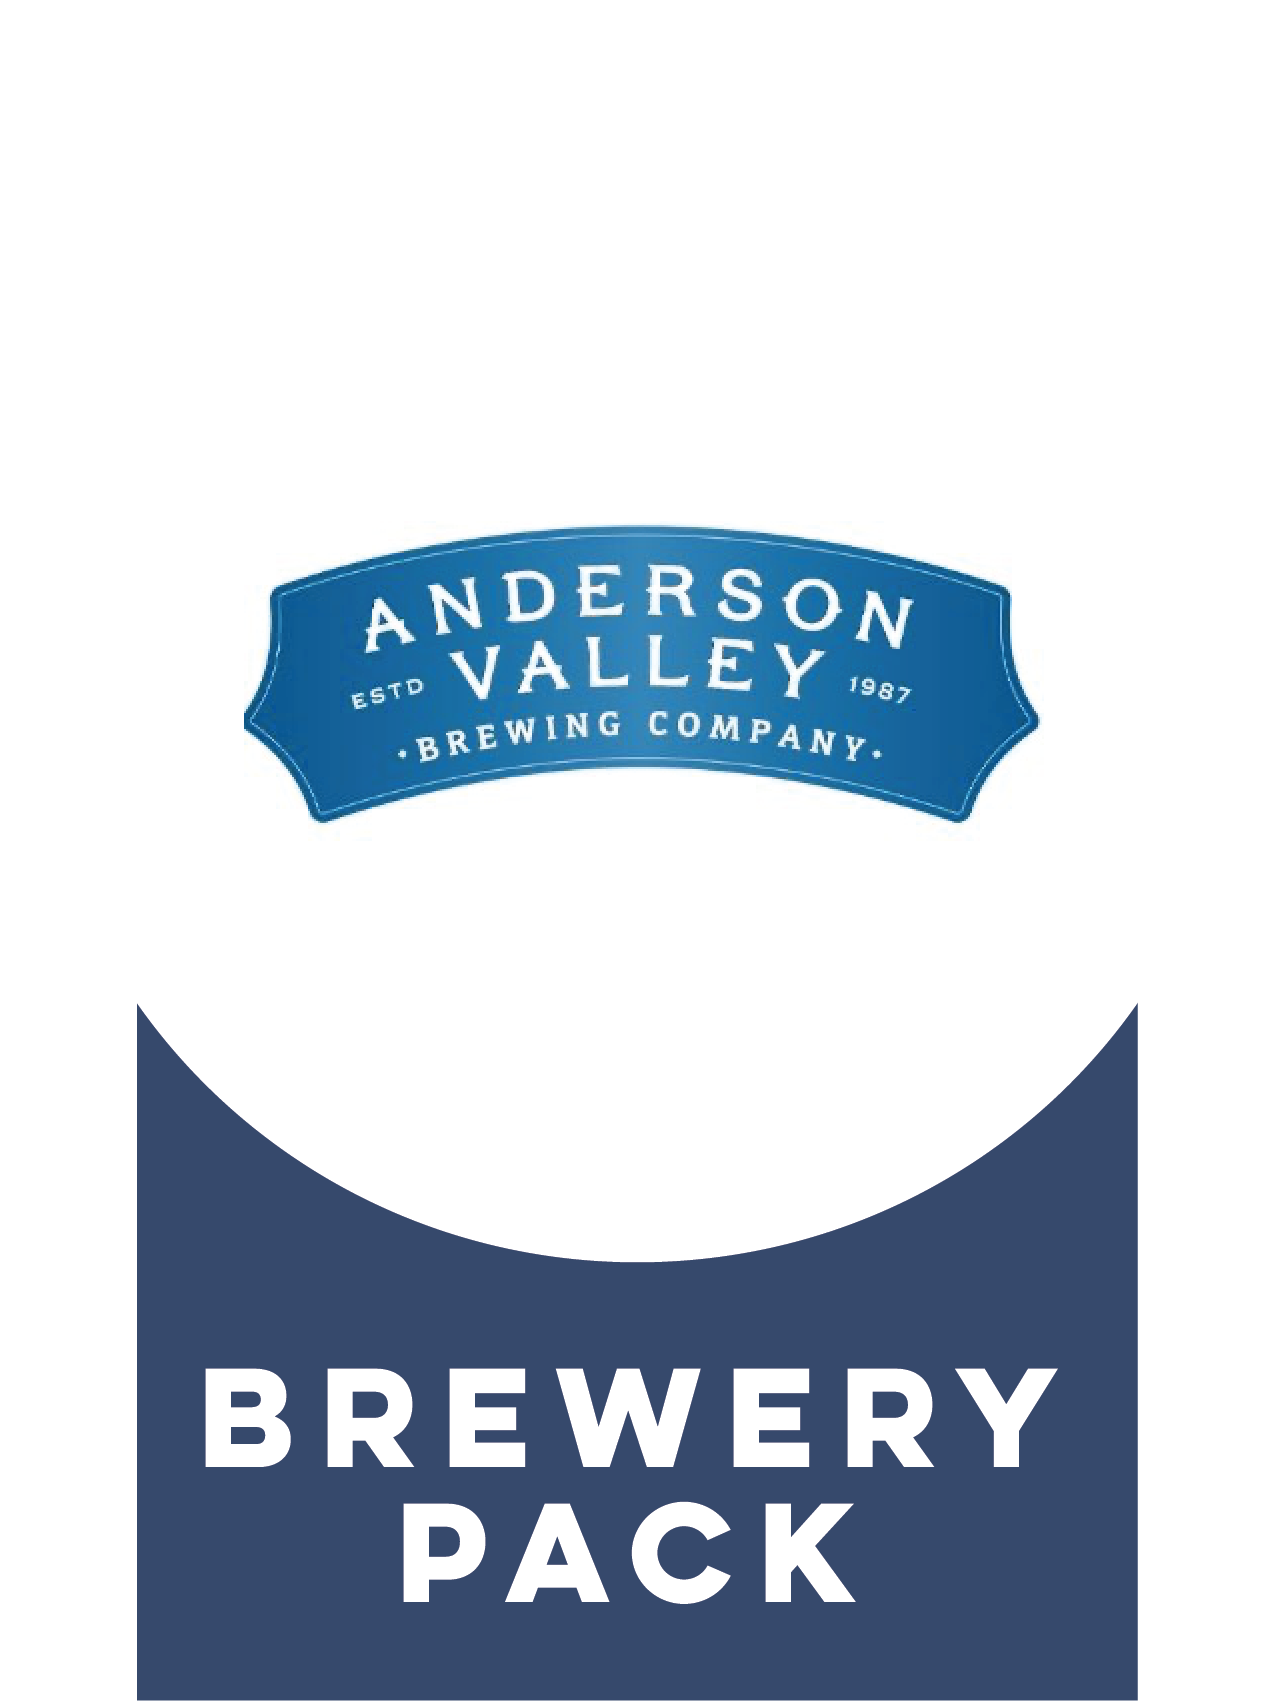 -Anderson Valley- Anderson Valley Brewery Pack-Packs & Cases- Only @ Beer Republic - The best online beer store for American & Canadian craft beer - Buy beer online from the USA and Canada - Bier online kopen - Amerikaans bier kopen - Craft beer store - Craft beer kopen - Amerikanisch bier kaufen - Bier online kaufen - Acheter biere online - IPA - Stout - Porter - New England IPA - Hazy IPA - Imperial Stout - Barrel Aged - Barrel Aged Imperial Stout - Brown - Dark beer - Blond - Blonde - Pilsner - Lager - W